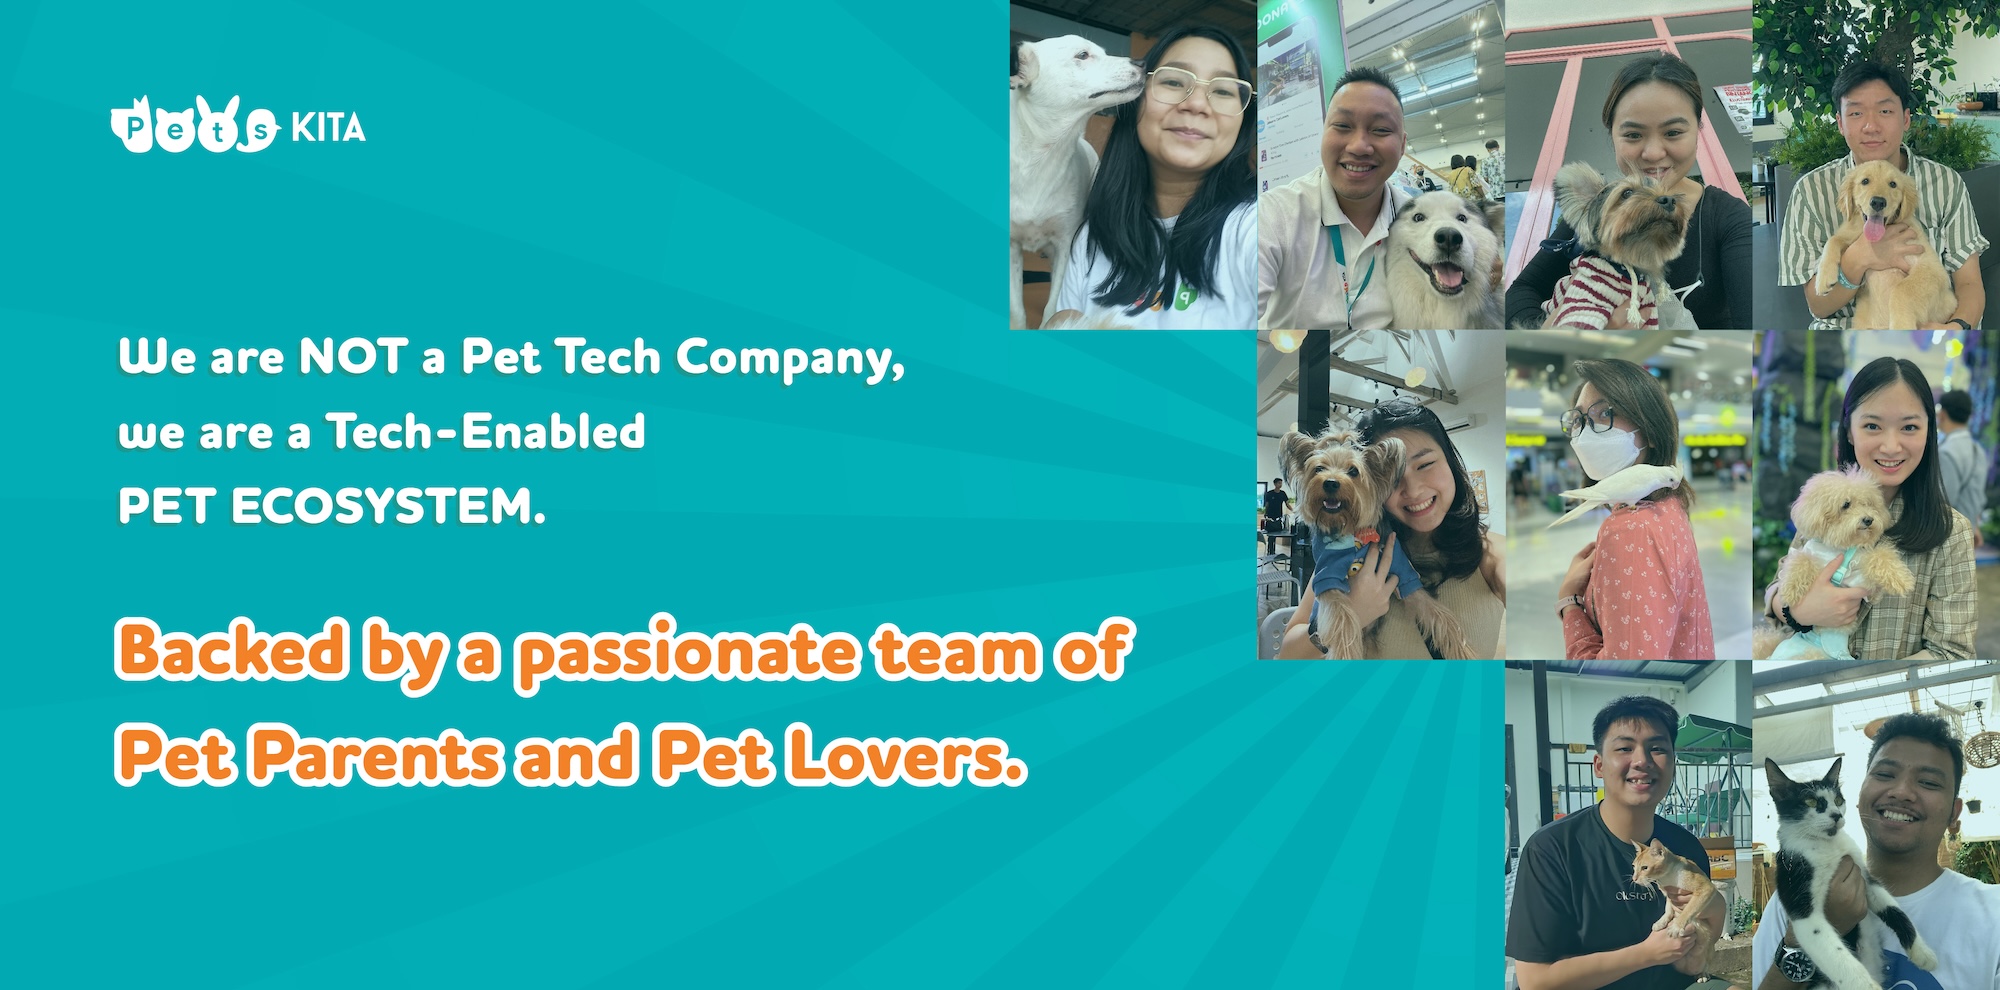 We are NOT a Pet Tech Company, we are a Tech-Enabled PET ECOSYSTEM. Backed by a passionate team of pet parents and pet lovers